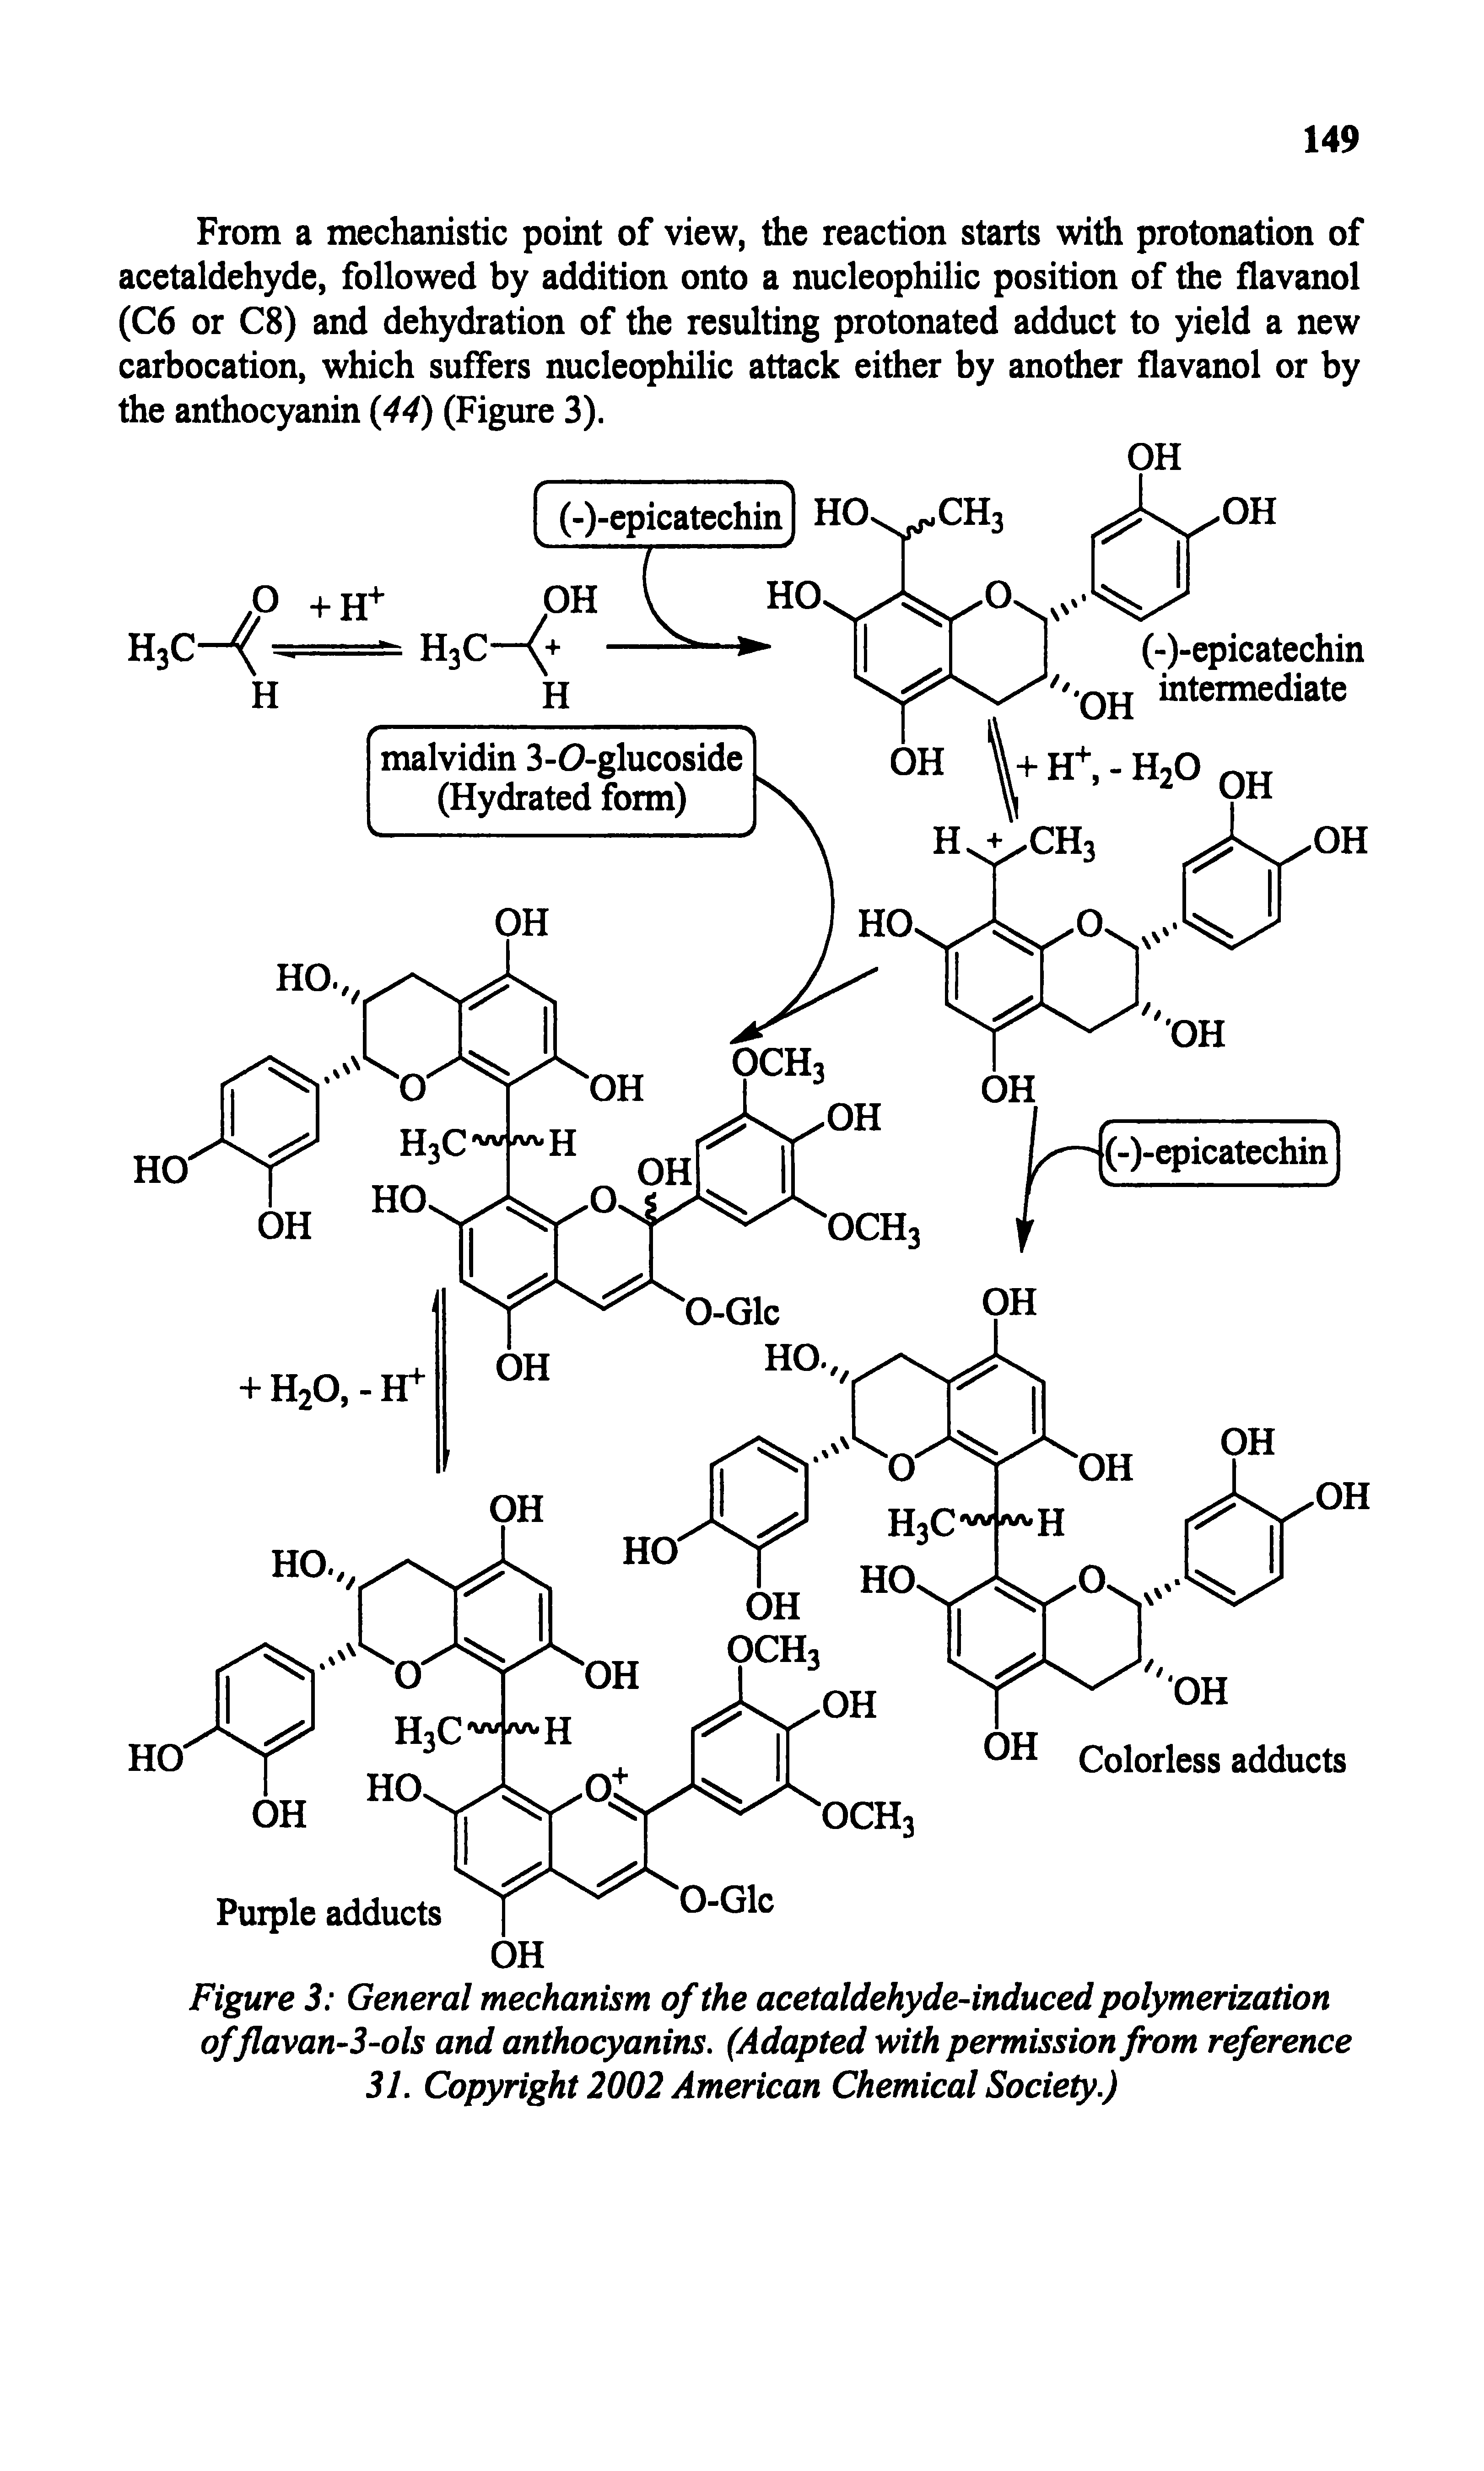 Figure 3 General mechanism of the acetaldehyde-induced polymerization of flavan-3-ols and anthocyanins. (Adapted with permission from reference 31. Copyright 2002 American Chemical Society.)...